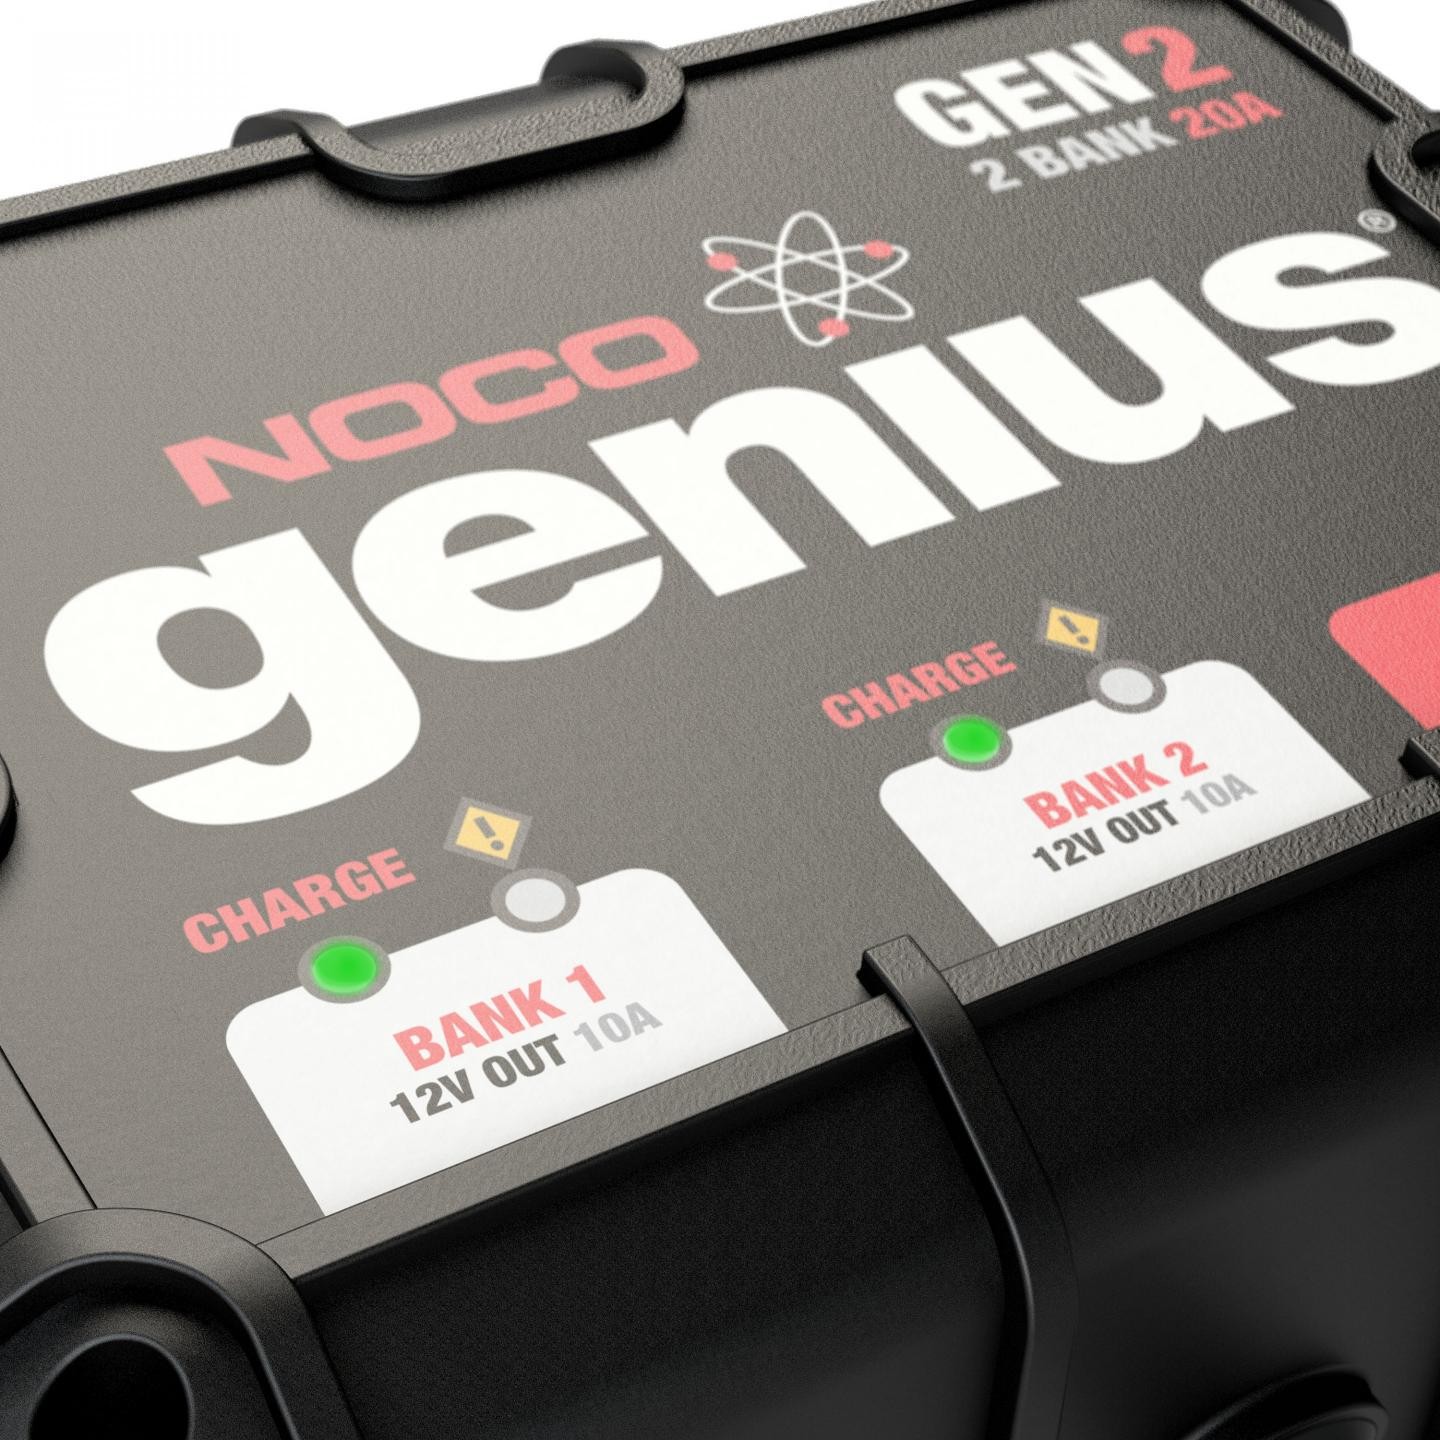 NOCO Genius GENPRO10X2, 2-Bank, 20A (10A/Bank) Smart Marine Battery  Charger, 12V Waterproof Onboard Boat Charger, Battery Maintainer and  Desulfator for AGM, Lithium (LiFePO4) and Deep-Cycle Batteries